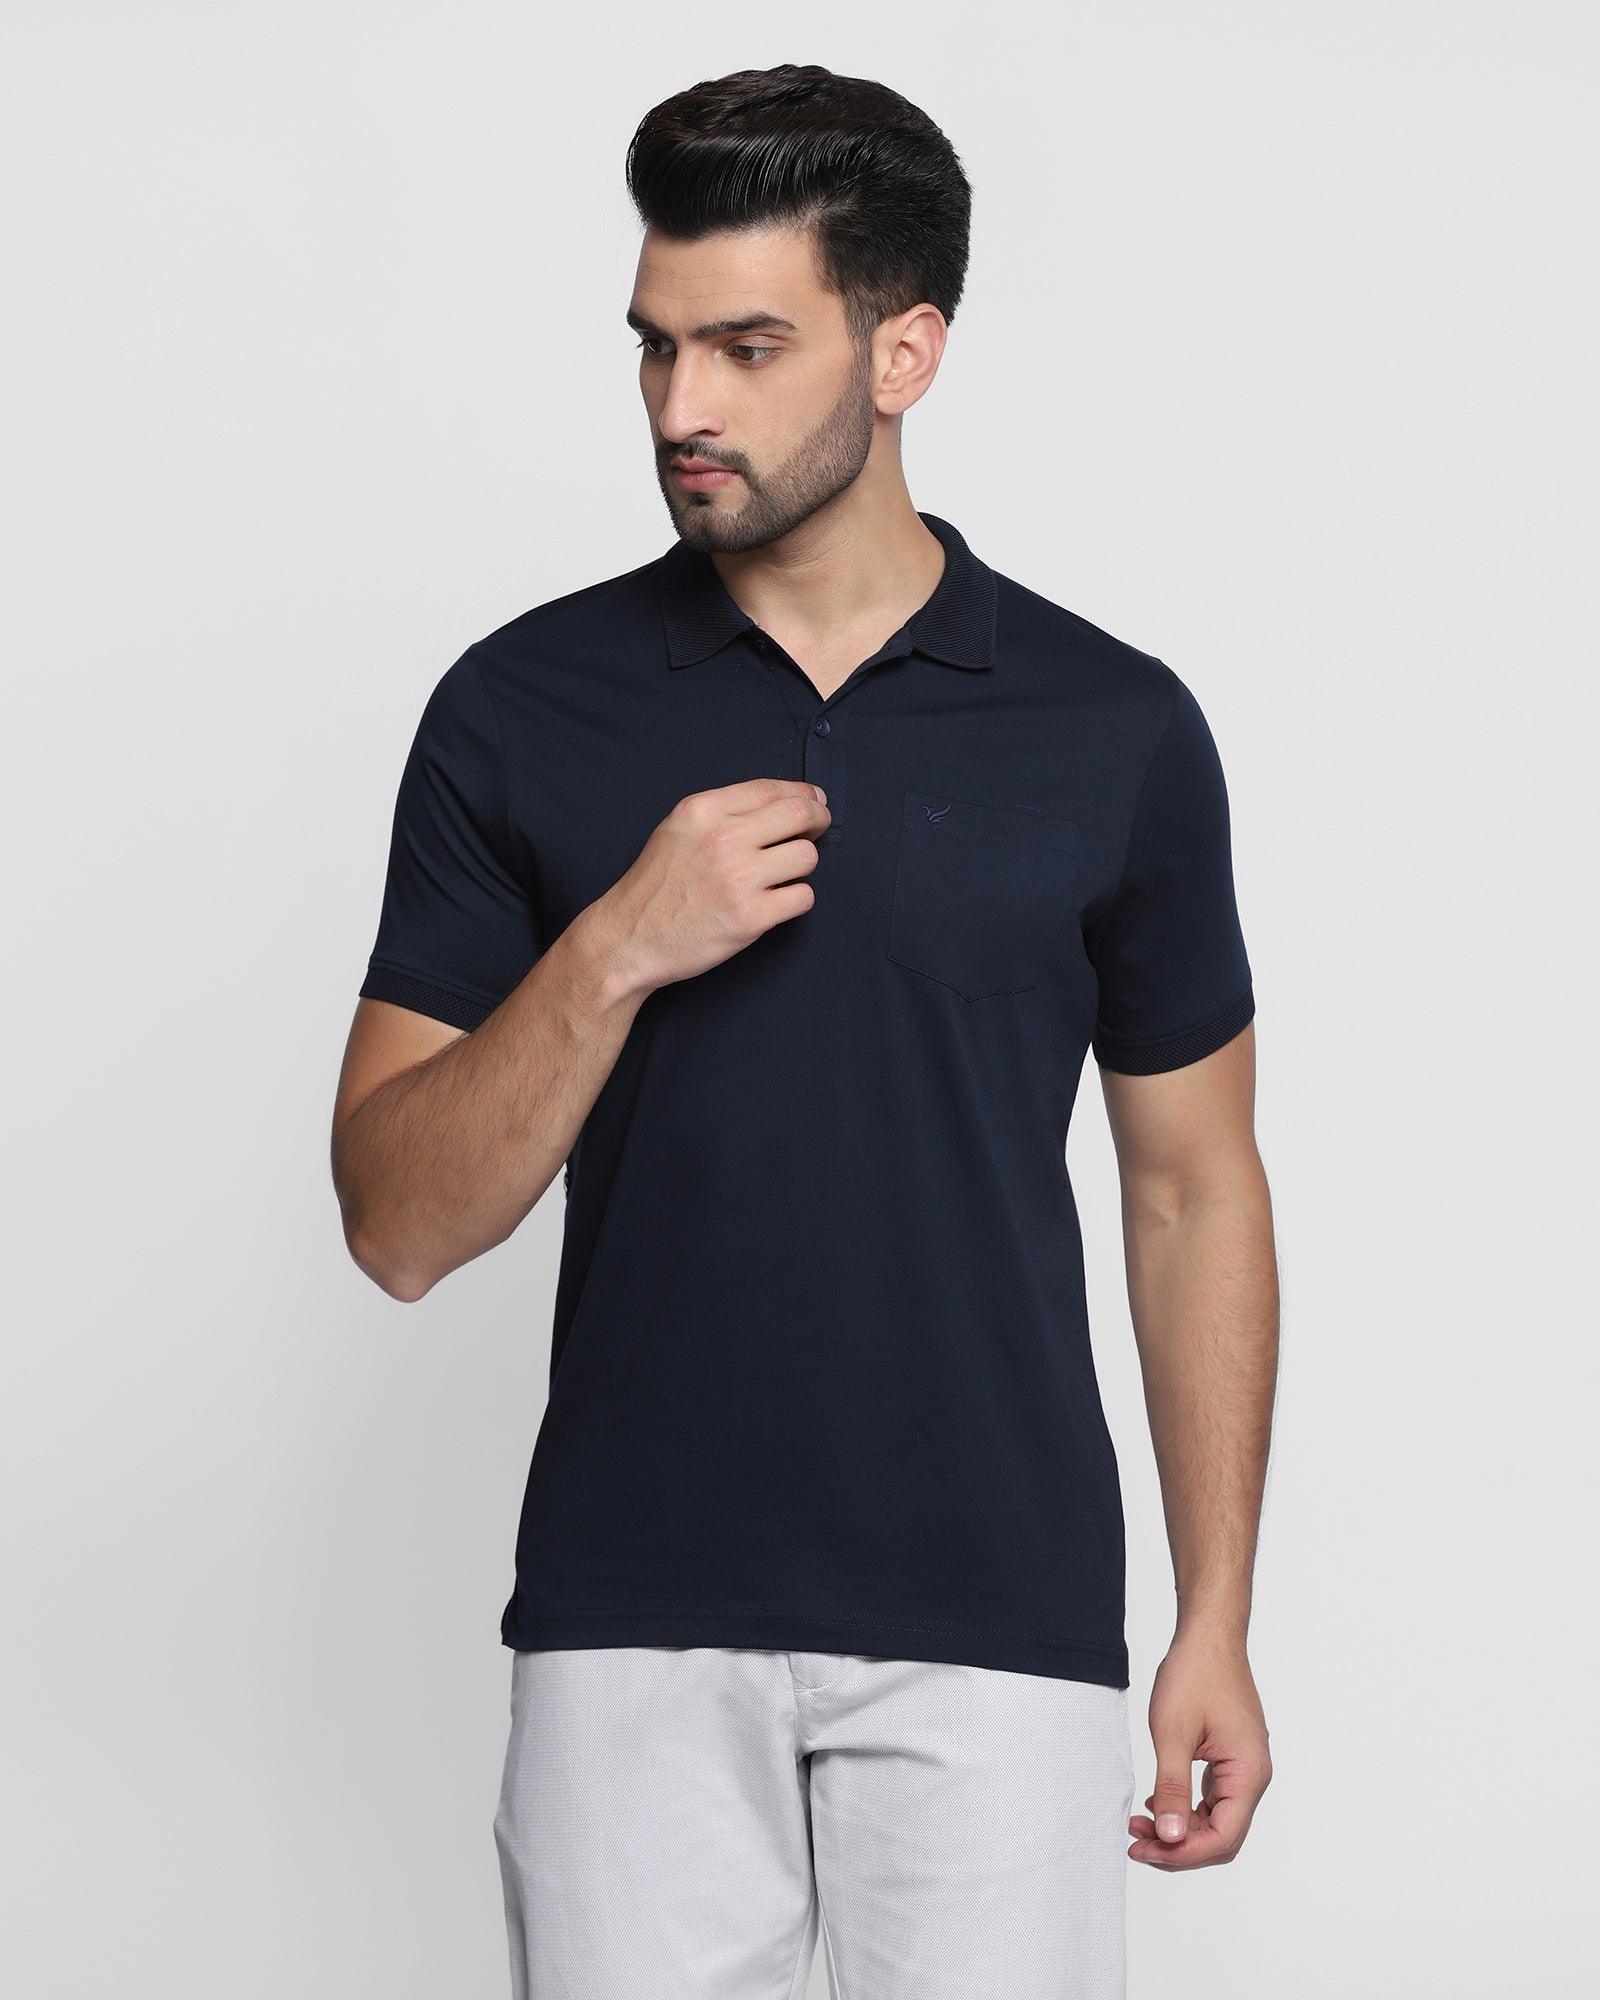 Polo Navy Solid T-Shirt - Figma